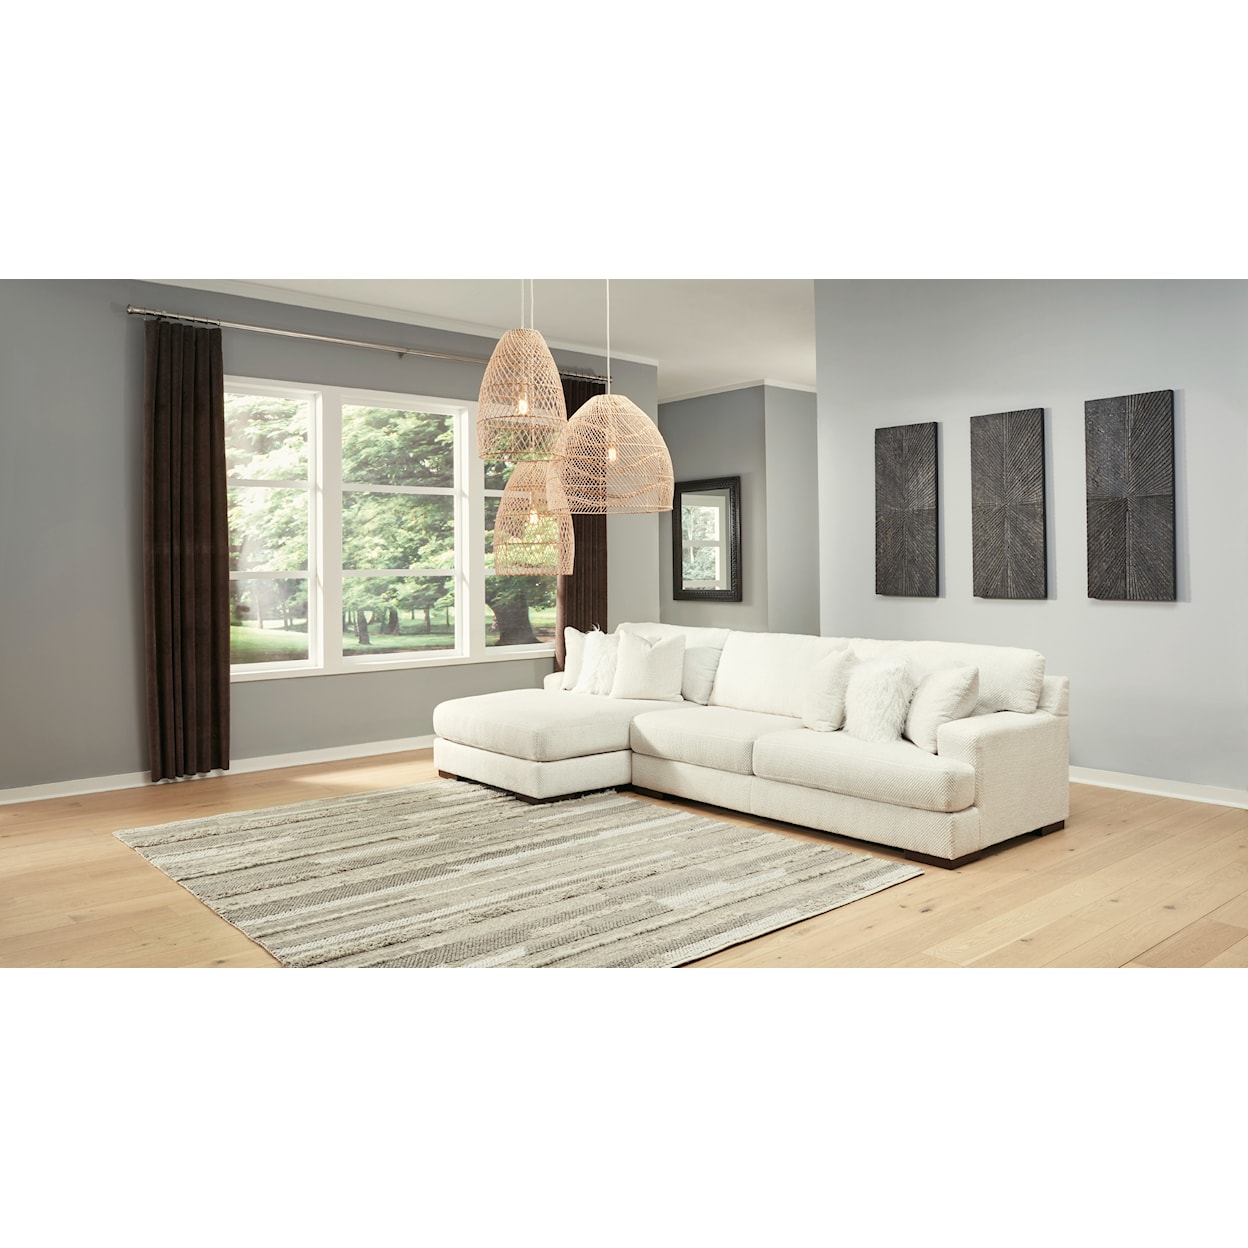 Signature Design by Ashley Zada 2-Piece Sectional with Chaise